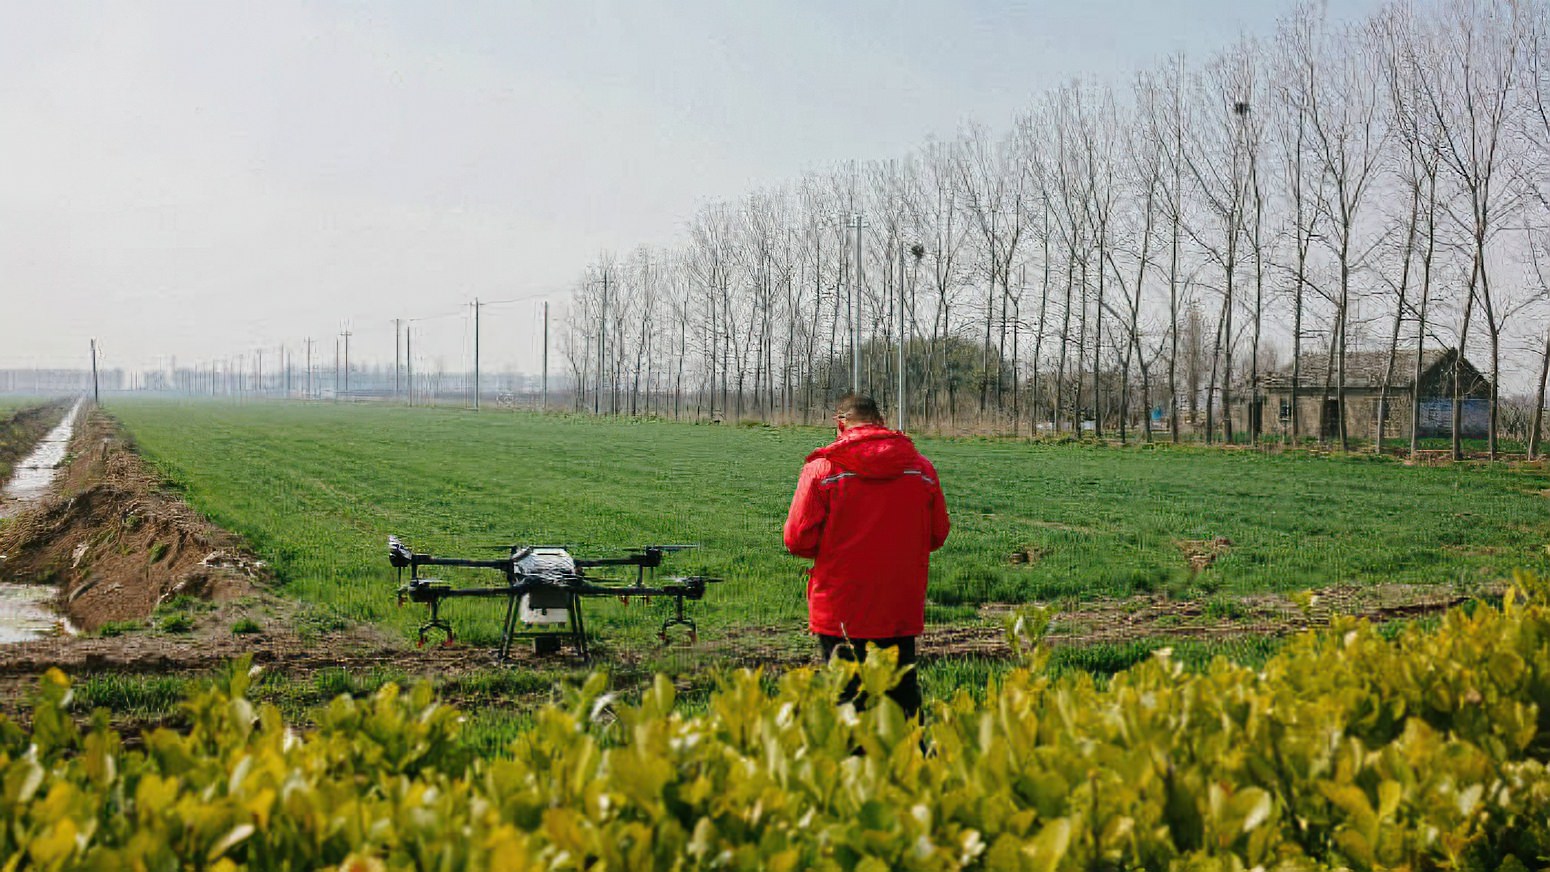 DJI shifts focus to agriculture as consumer drone sales slow